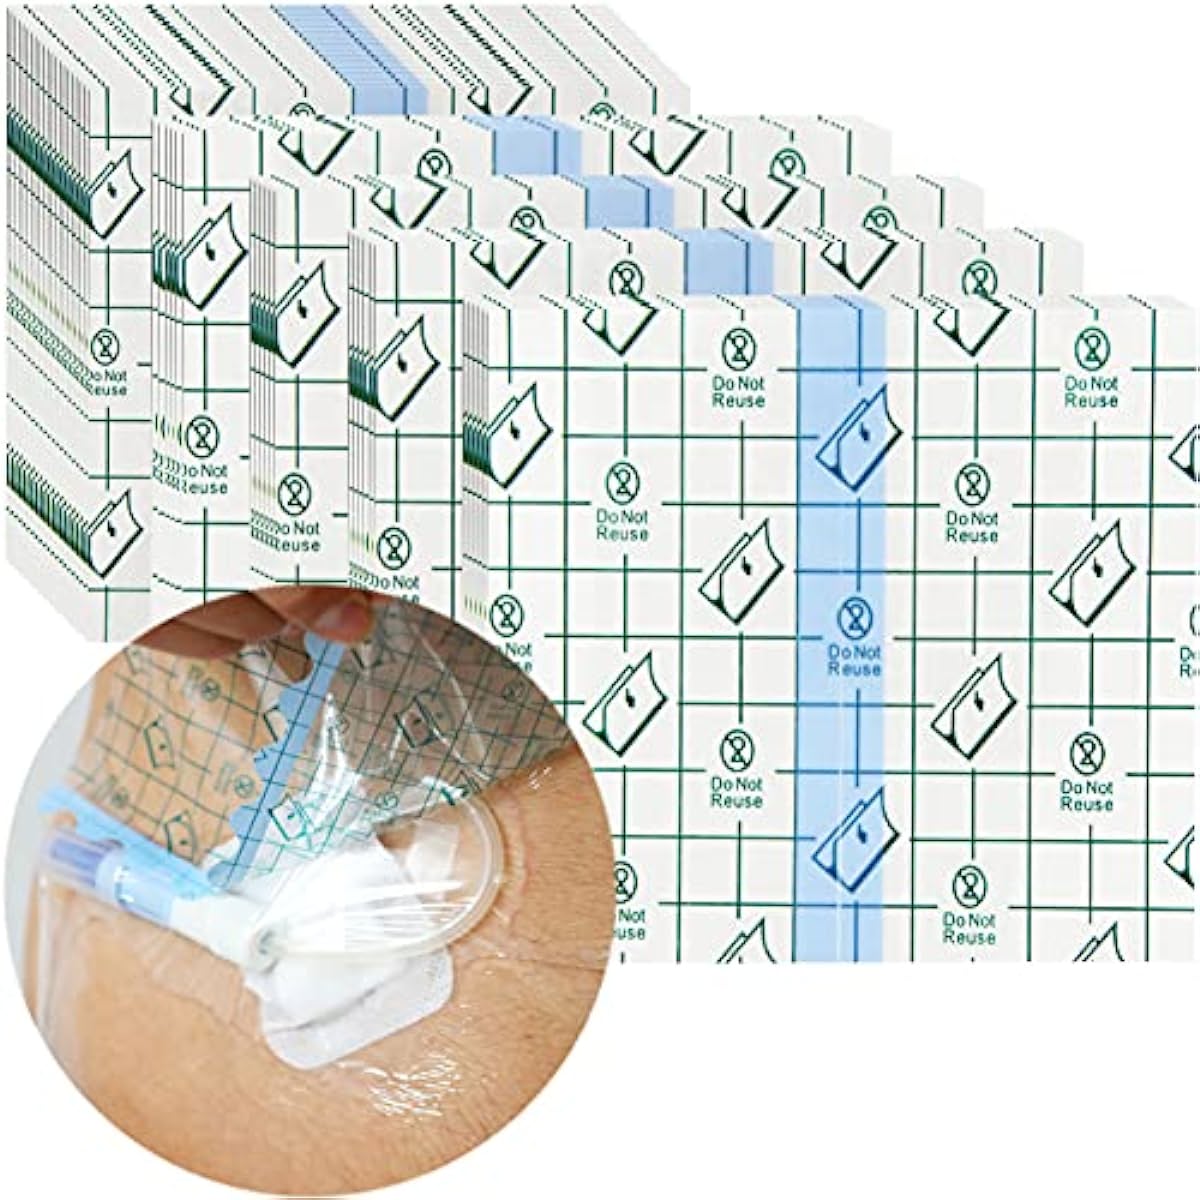 Waterproof Stretch Adhesive Bandage PD Dialysis Catheter Shower Cover Wound Shields for Picc Line Chest Peritoneal Chemo Port Transparent Film Bathing Water Barrier Protector, 6\"x6\"(Pack of 50)